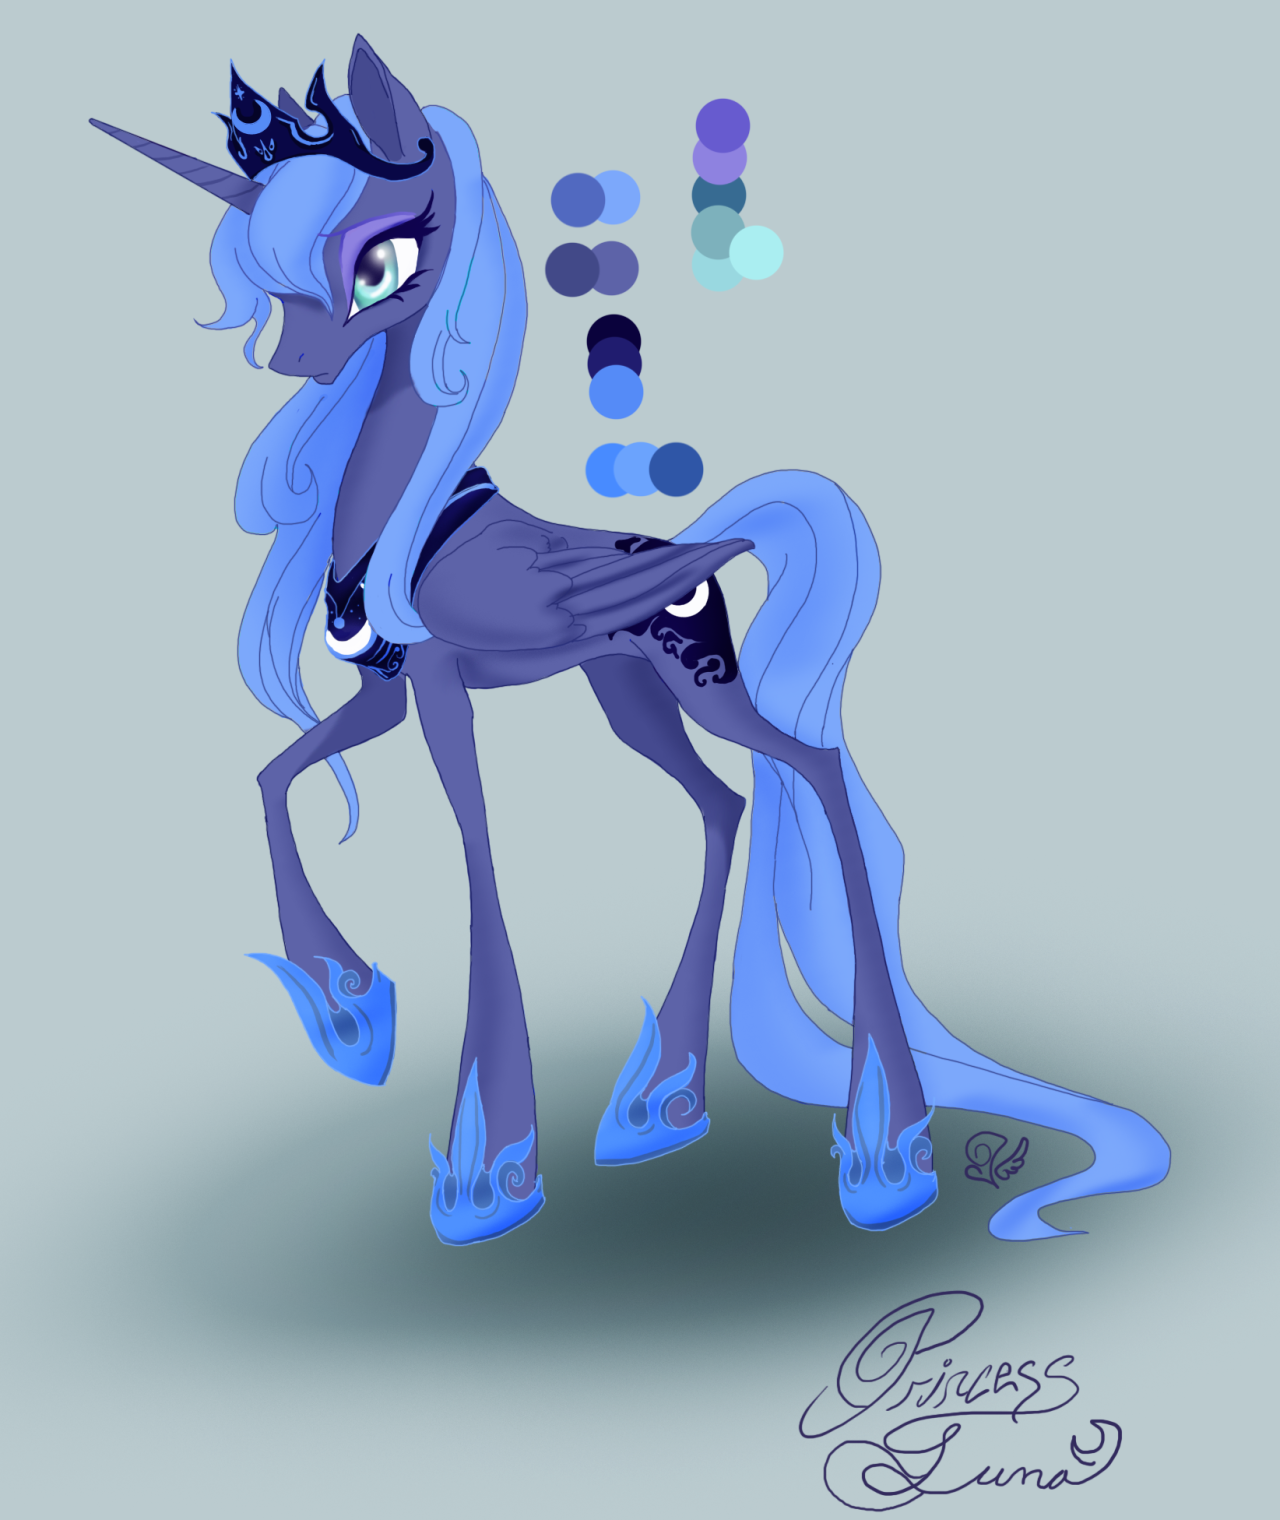 fire-star-animations: Princess Luna doodle. I had the sketch months ago, and finally